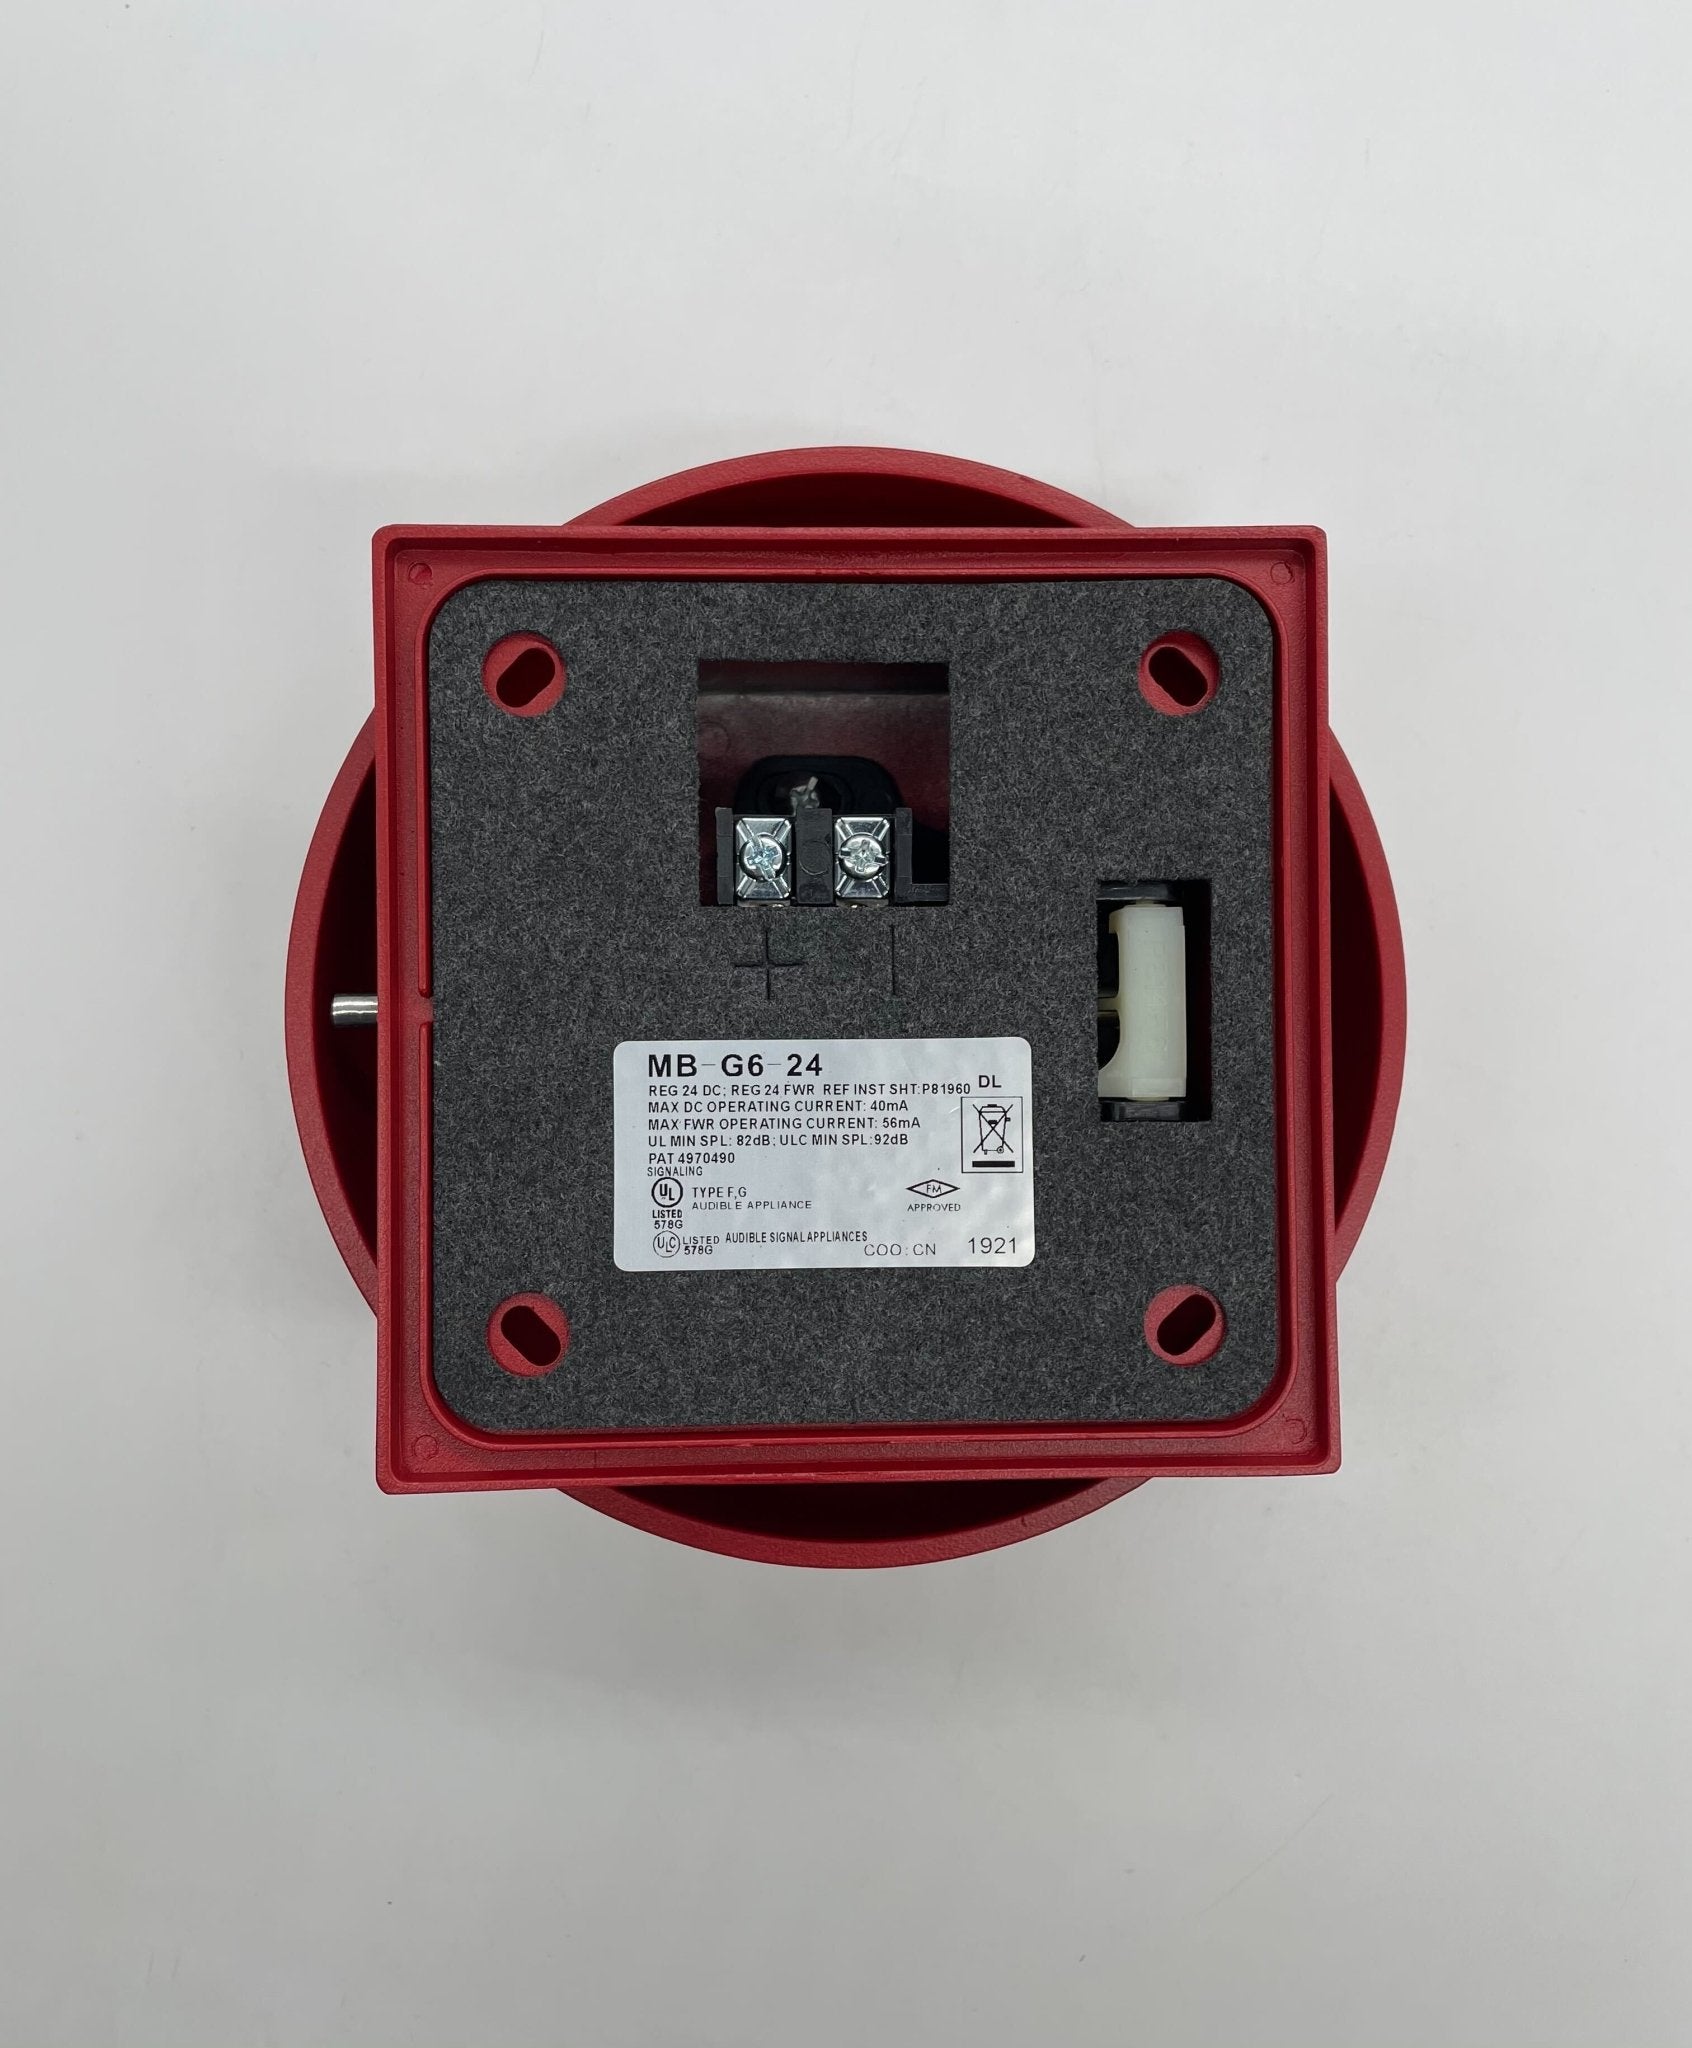 Wheelock MB-G6-24-R - The Fire Alarm Supplier